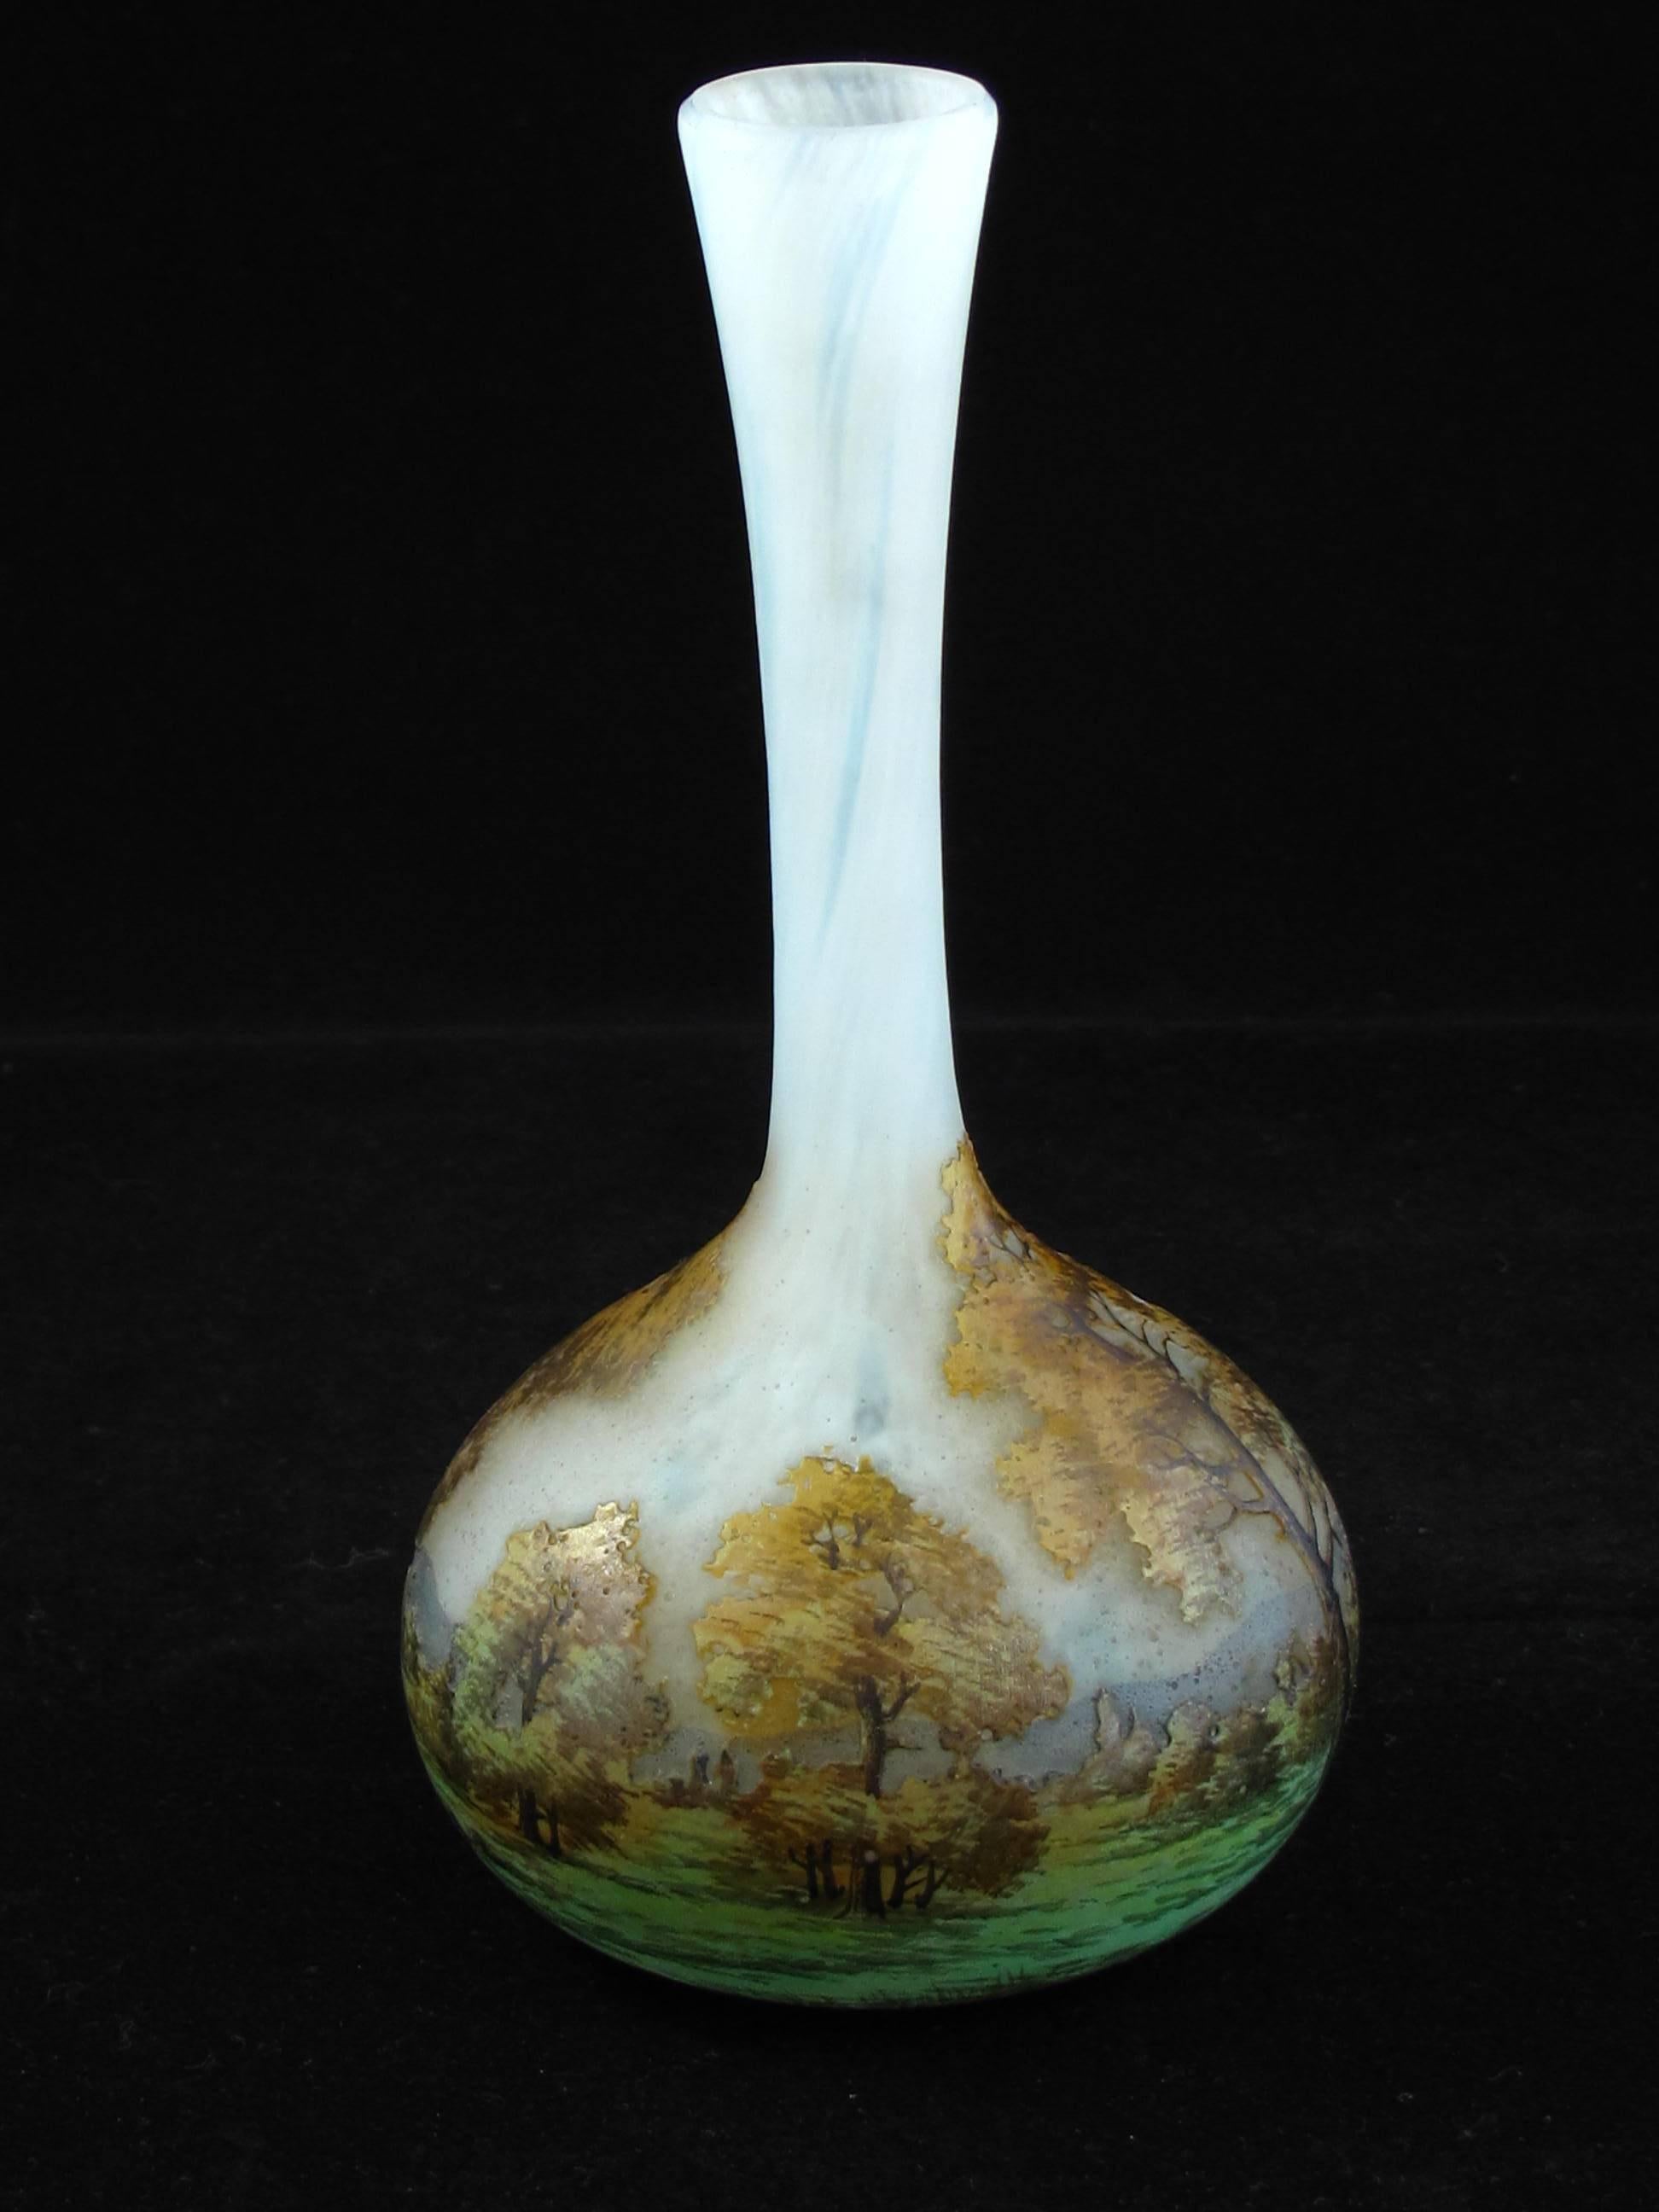 A superb quality Daum glass Paysage Lorraine cameo and enamel solifleur vase. Very finely detailed and with excellent color. A stunning landscape vase, French, circa 1905-1910. Signed Daum Nancy and with the painters initials HF to the underside.